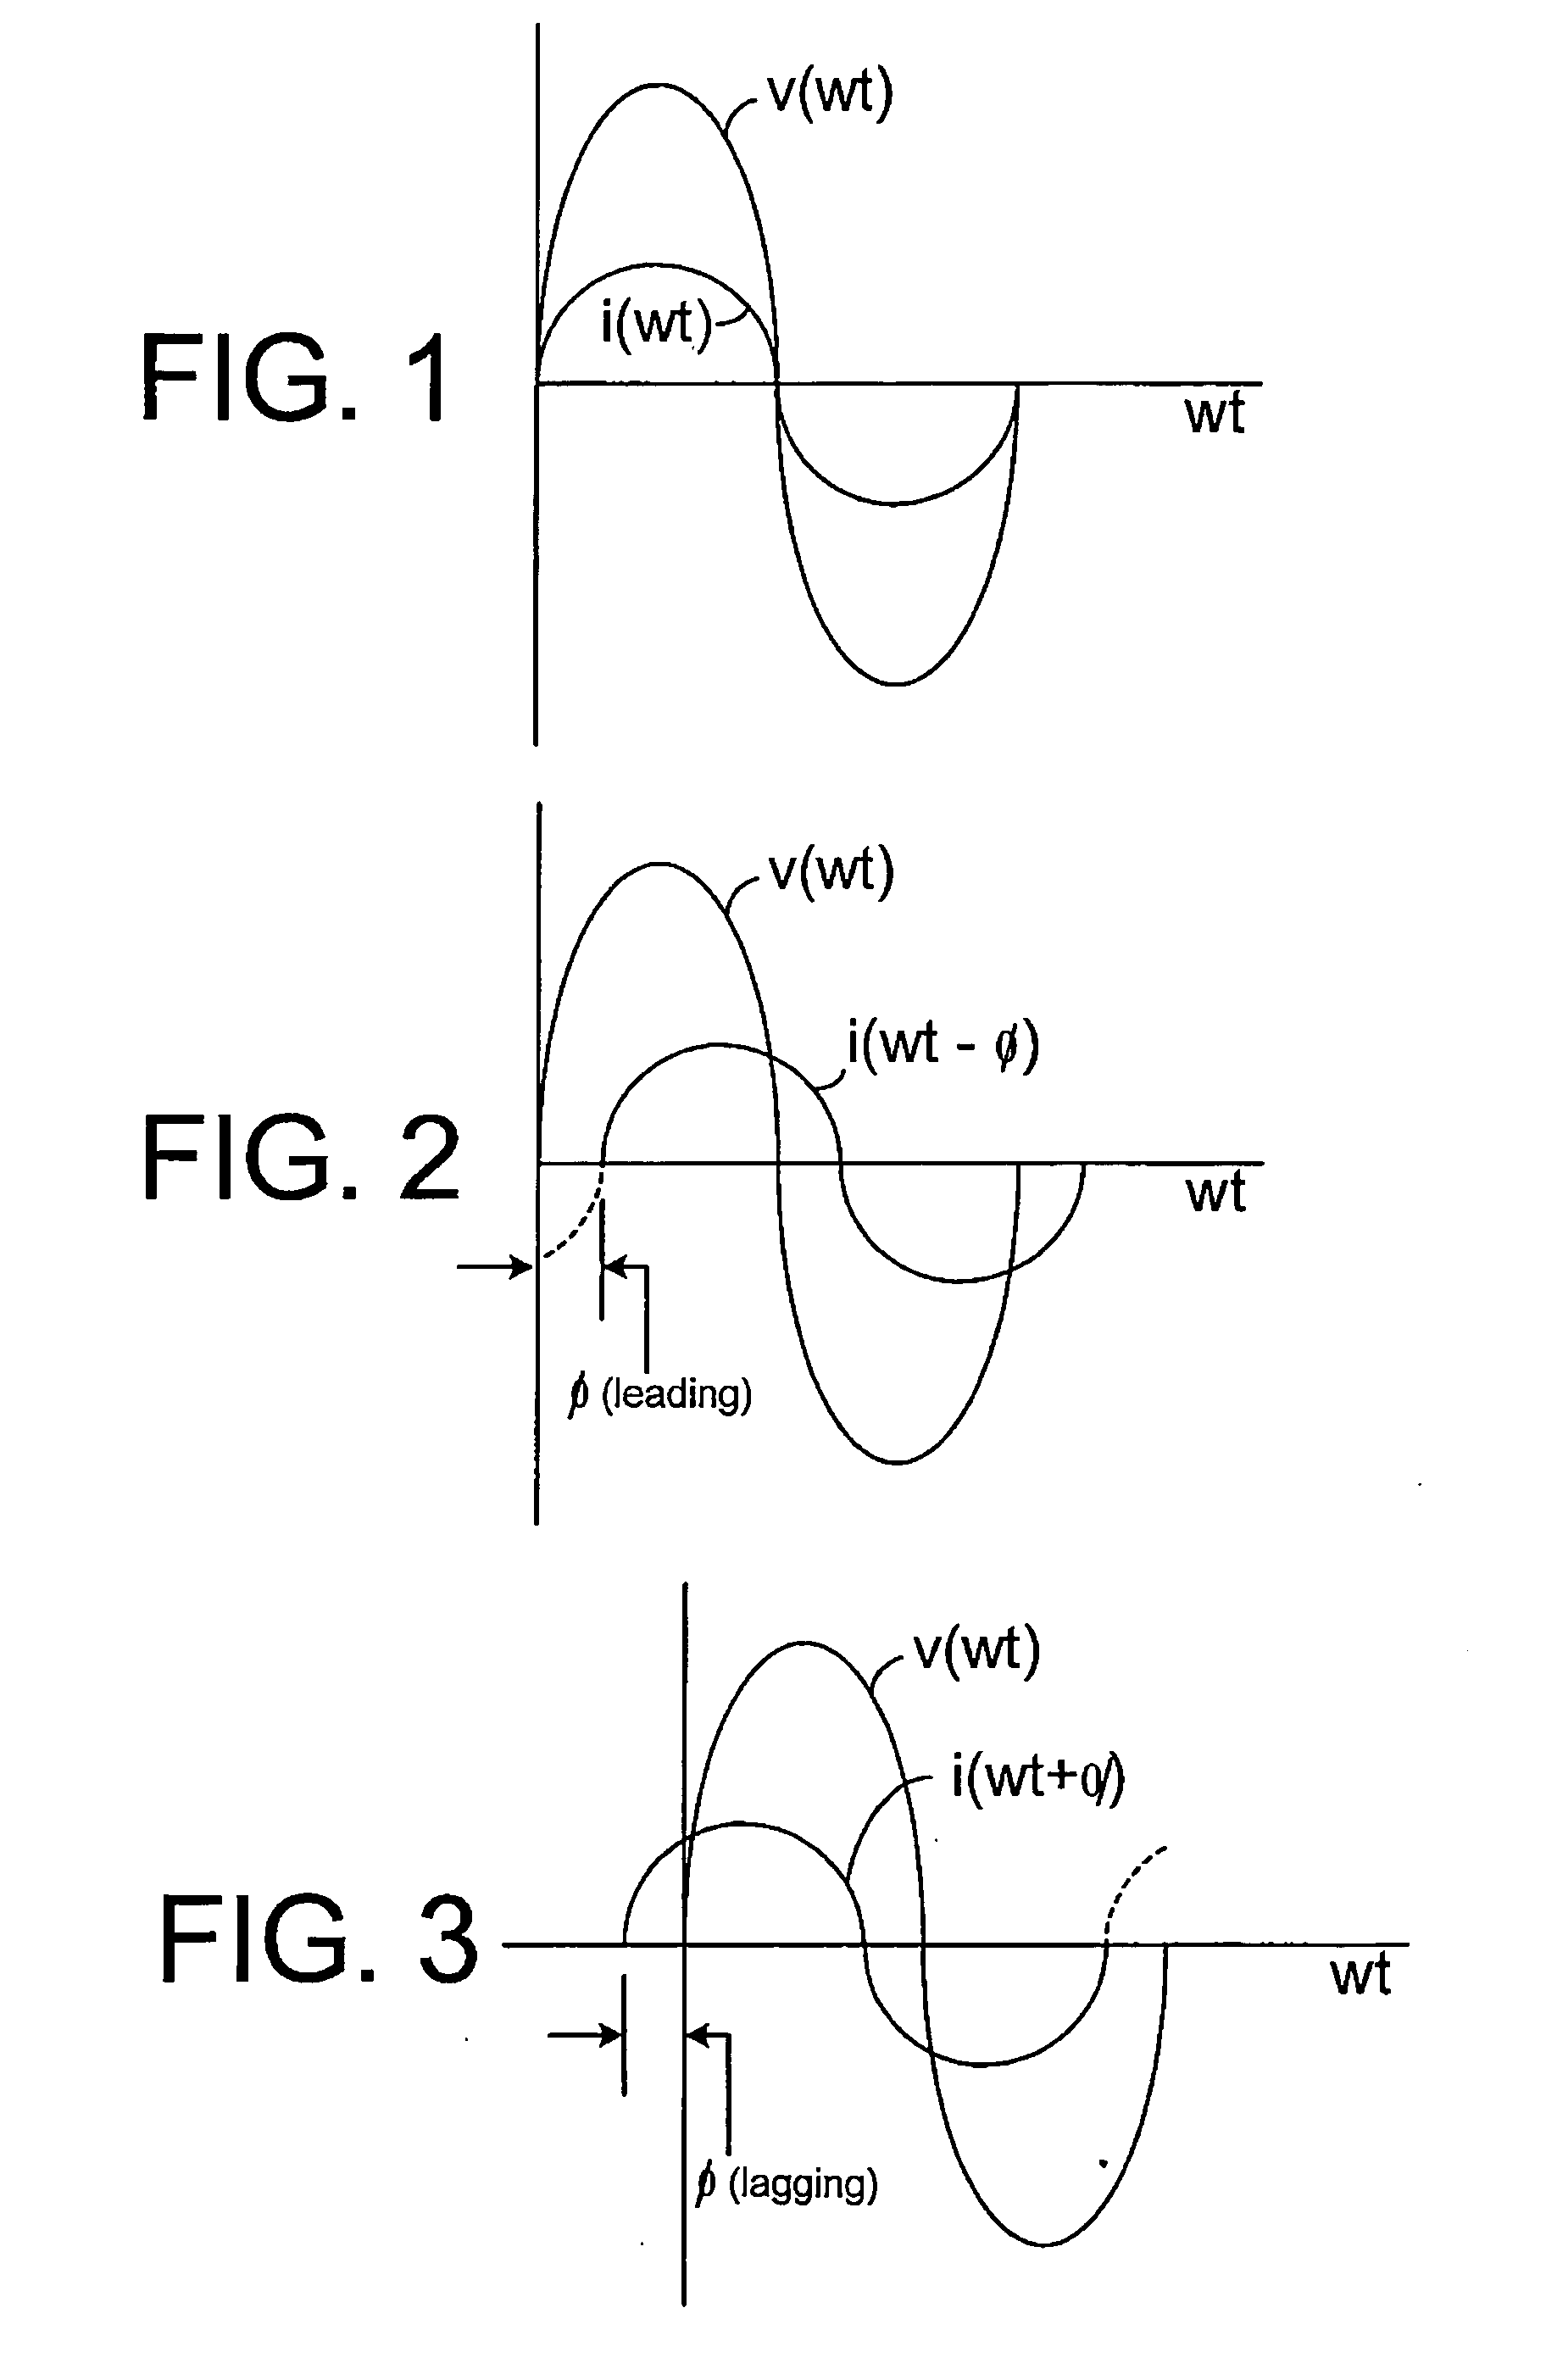 Continuous reactive power support for wind turbine generators